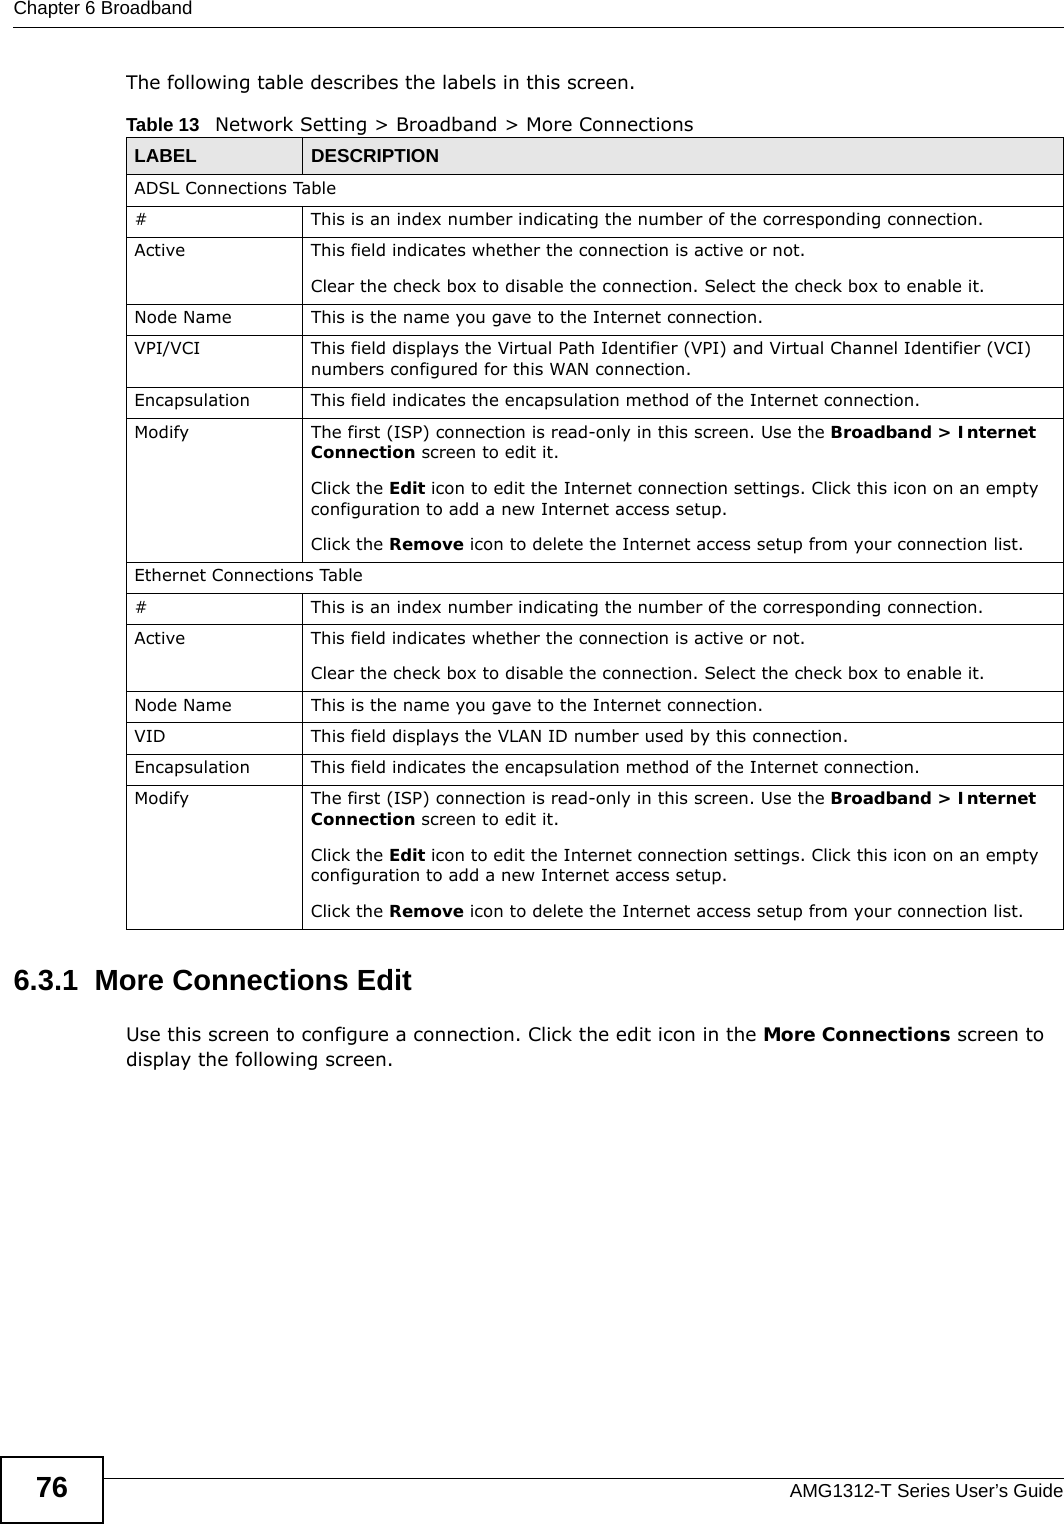 Chapter 6 BroadbandAMG1312-T Series User’s Guide76The following table describes the labels in this screen.  6.3.1  More Connections EditUse this screen to configure a connection. Click the edit icon in the More Connections screen to display the following screen.Table 13   Network Setting &gt; Broadband &gt; More ConnectionsLABEL DESCRIPTIONADSL Connections Table# This is an index number indicating the number of the corresponding connection.Active This field indicates whether the connection is active or not.Clear the check box to disable the connection. Select the check box to enable it.Node Name This is the name you gave to the Internet connection.VPI/VCI This field displays the Virtual Path Identifier (VPI) and Virtual Channel Identifier (VCI) numbers configured for this WAN connection. Encapsulation This field indicates the encapsulation method of the Internet connection.Modify The first (ISP) connection is read-only in this screen. Use the Broadband &gt; Internet Connection screen to edit it.Click the Edit icon to edit the Internet connection settings. Click this icon on an empty configuration to add a new Internet access setup.Click the Remove icon to delete the Internet access setup from your connection list.Ethernet Connections Table# This is an index number indicating the number of the corresponding connection.Active This field indicates whether the connection is active or not.Clear the check box to disable the connection. Select the check box to enable it.Node Name This is the name you gave to the Internet connection.VID This field displays the VLAN ID number used by this connection.Encapsulation This field indicates the encapsulation method of the Internet connection.Modify The first (ISP) connection is read-only in this screen. Use the Broadband &gt; Internet Connection screen to edit it.Click the Edit icon to edit the Internet connection settings. Click this icon on an empty configuration to add a new Internet access setup.Click the Remove icon to delete the Internet access setup from your connection list.